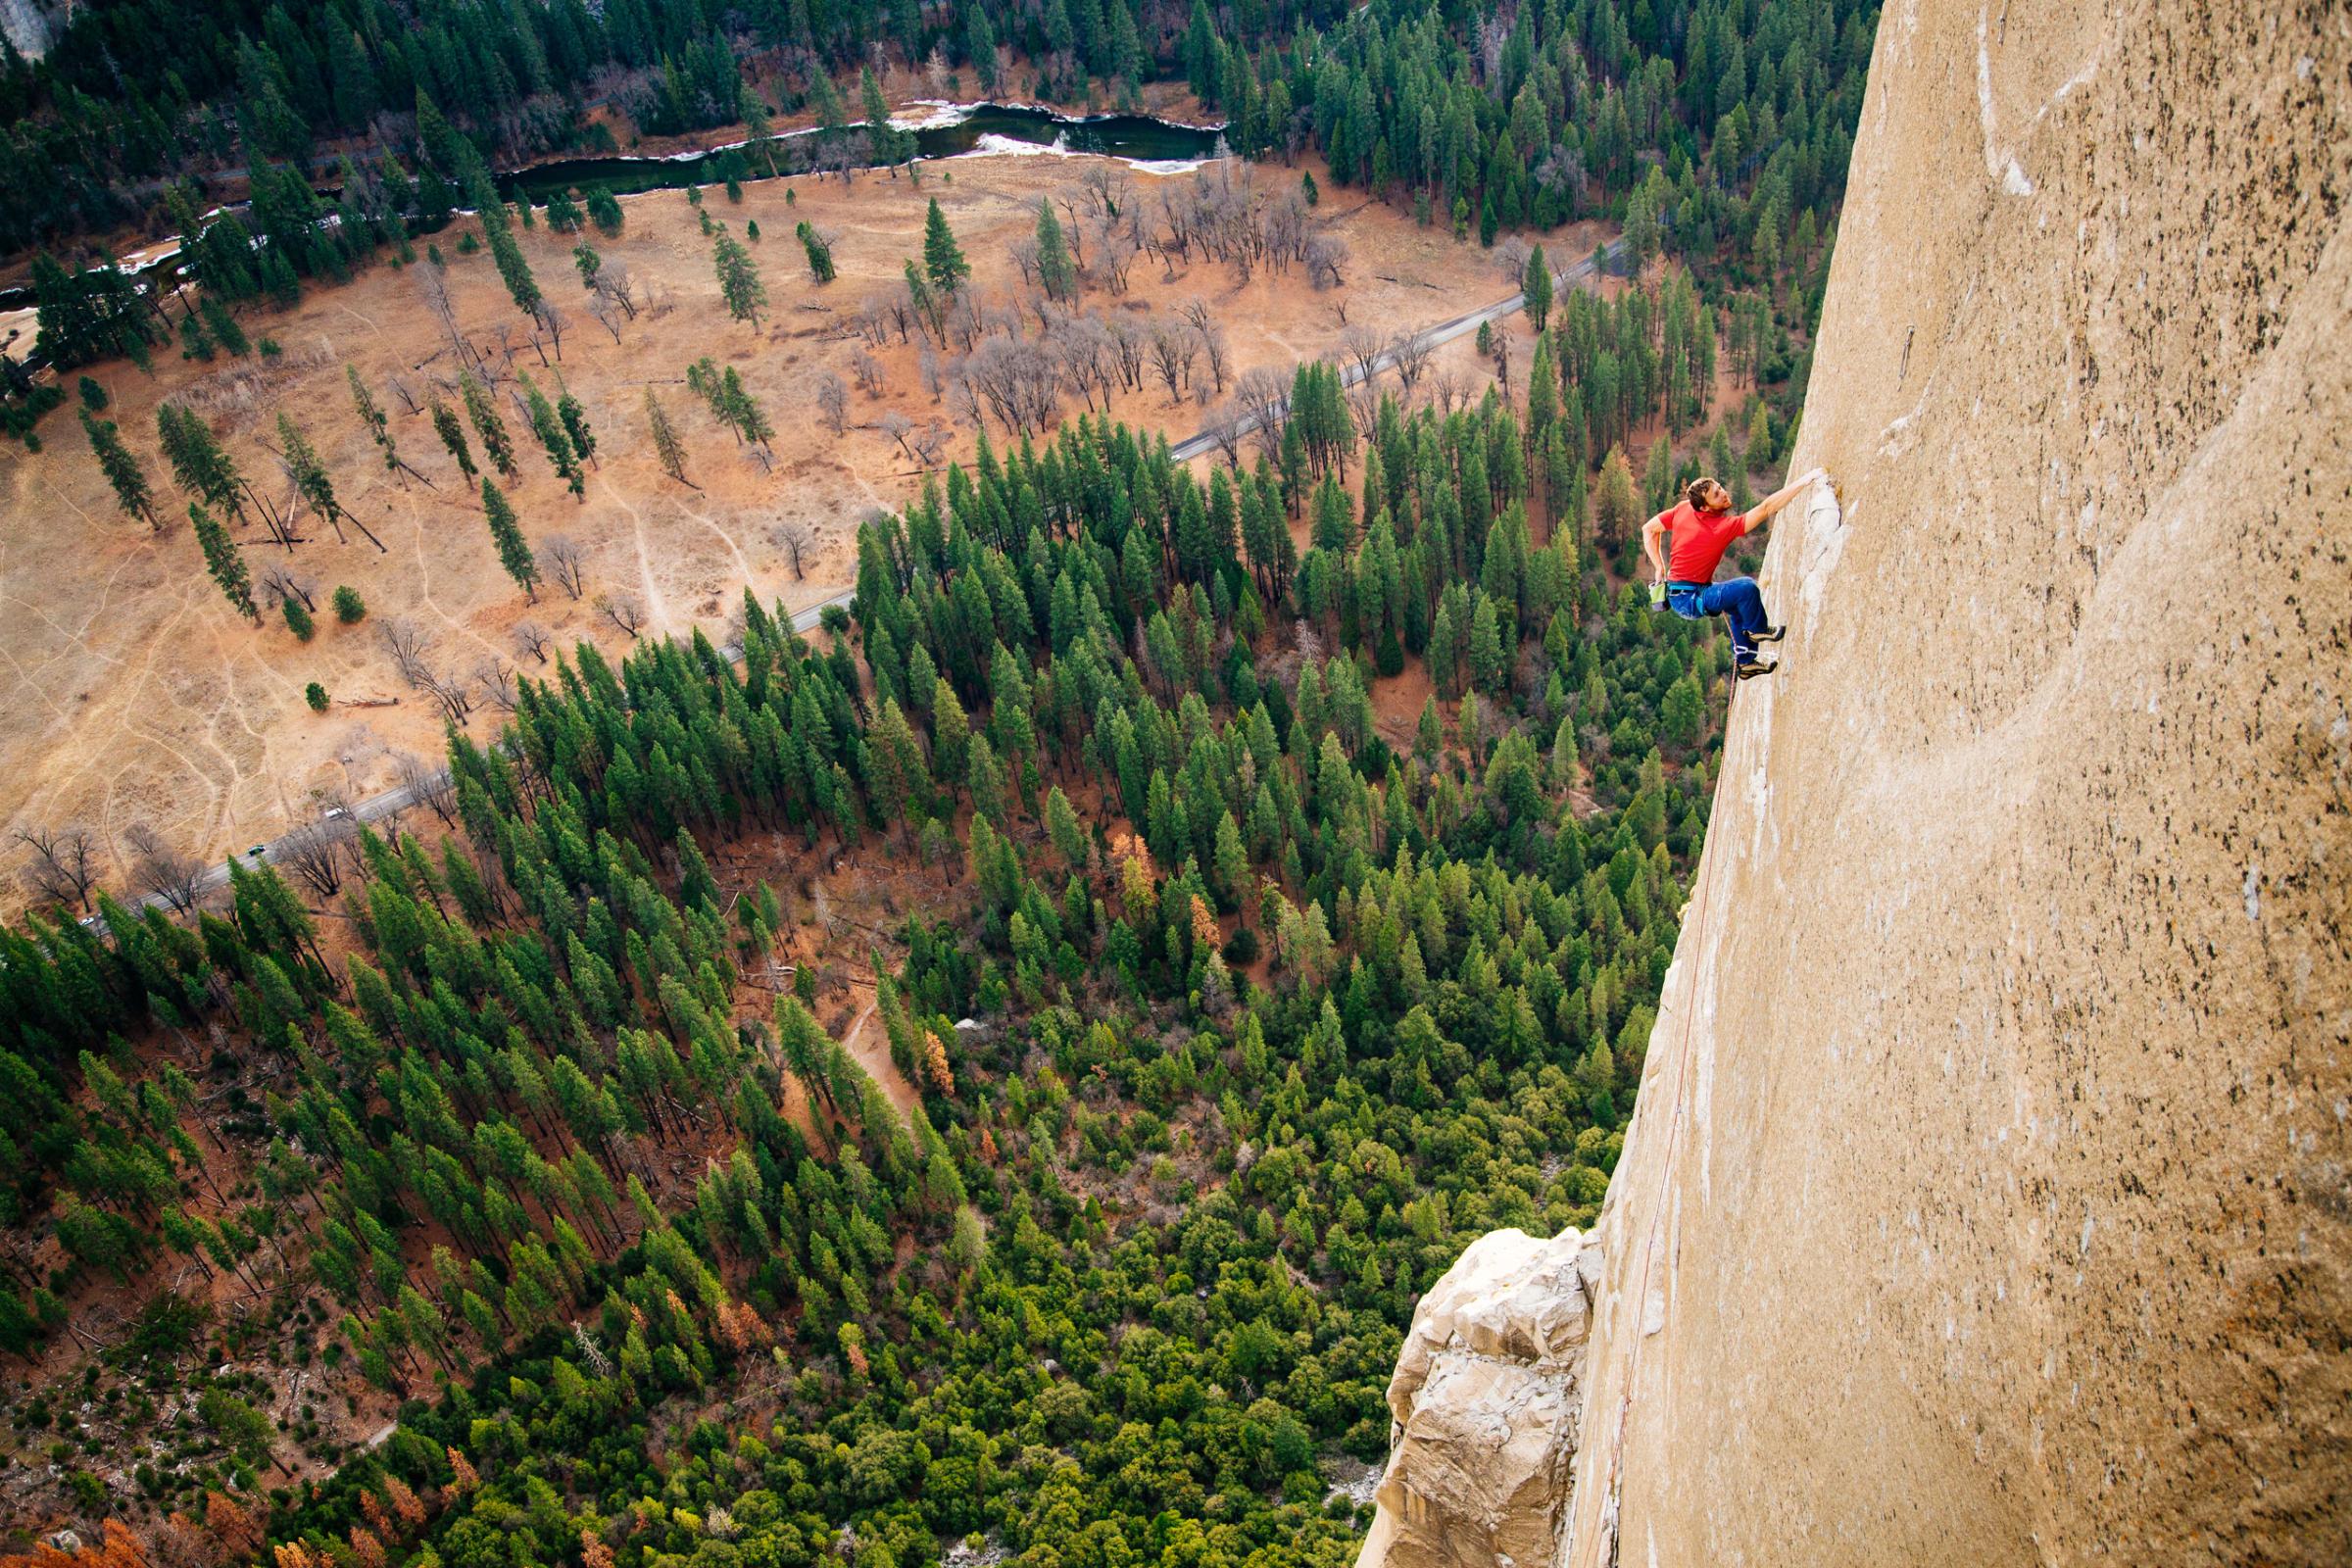 2015: Tommy Caldwell and Kevin Jorgeson free climb the Dawn Wall